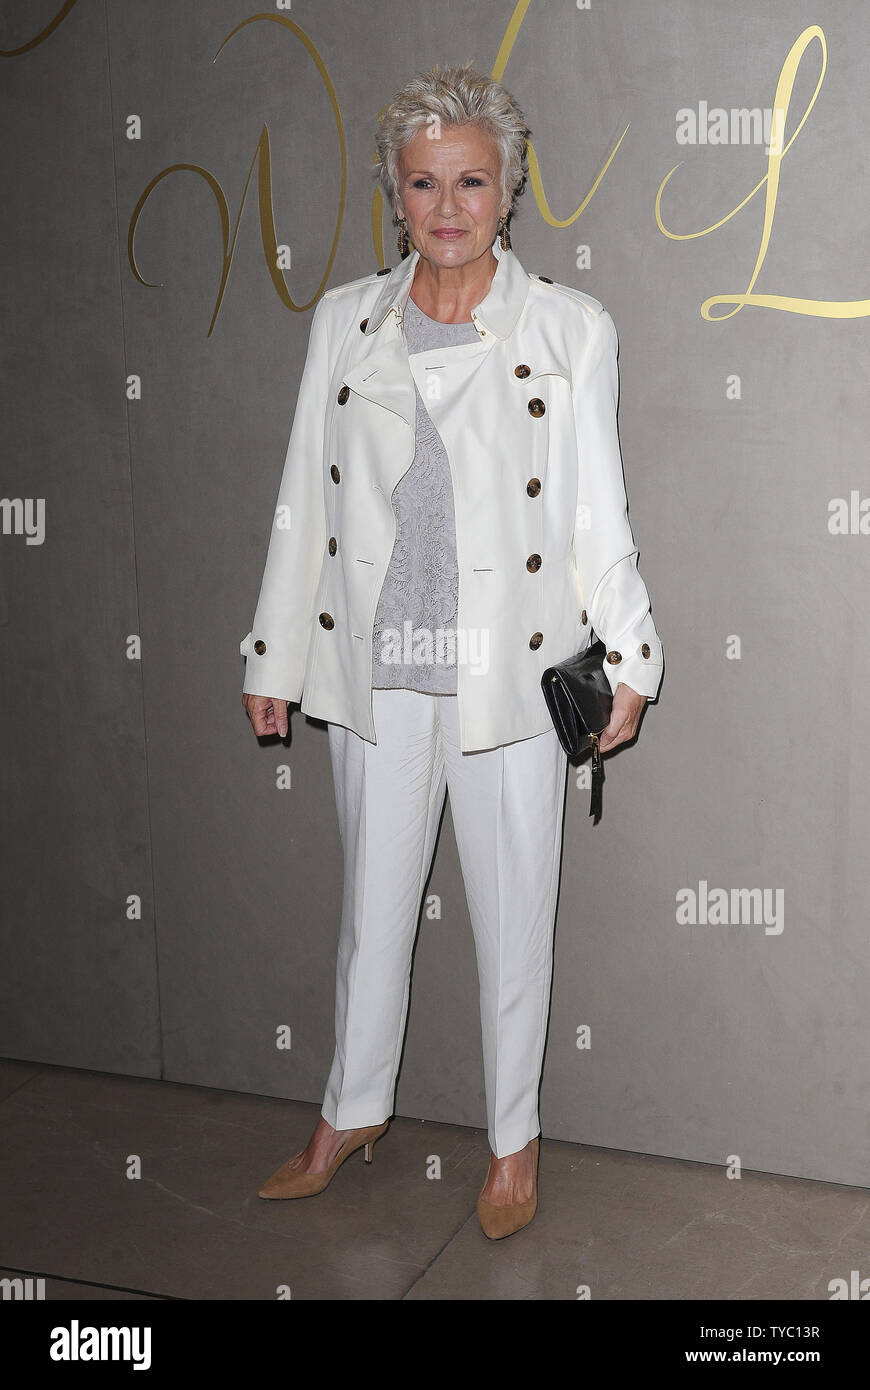 English actress Julie Walters attends the Burberry Festive Film Premiere at Burberry Regent Street in London on November 3, 2015. Photo by Paul Treadway/ UPI Stock Photo